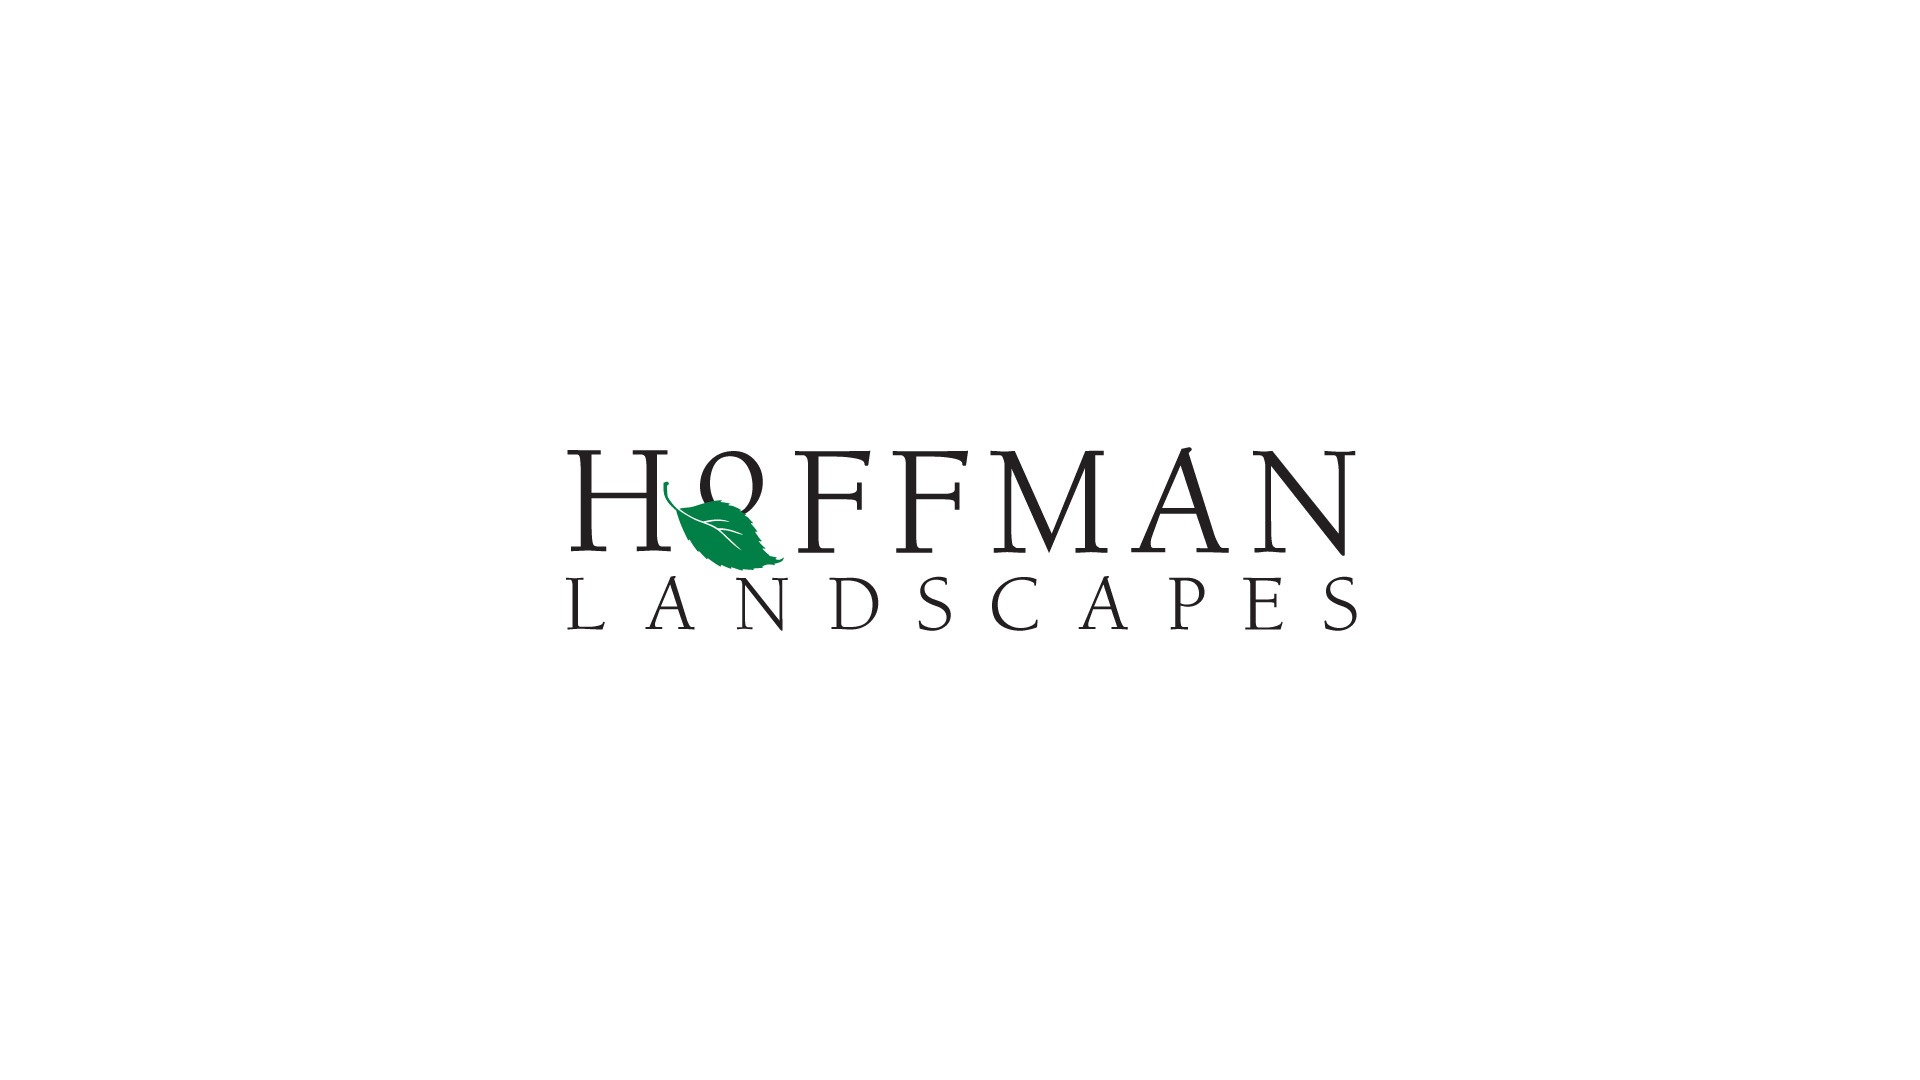 This is a simple, clean logo for "Hoffman Landscapes" featuring black text and a single green leaf integrated into the letter "O."